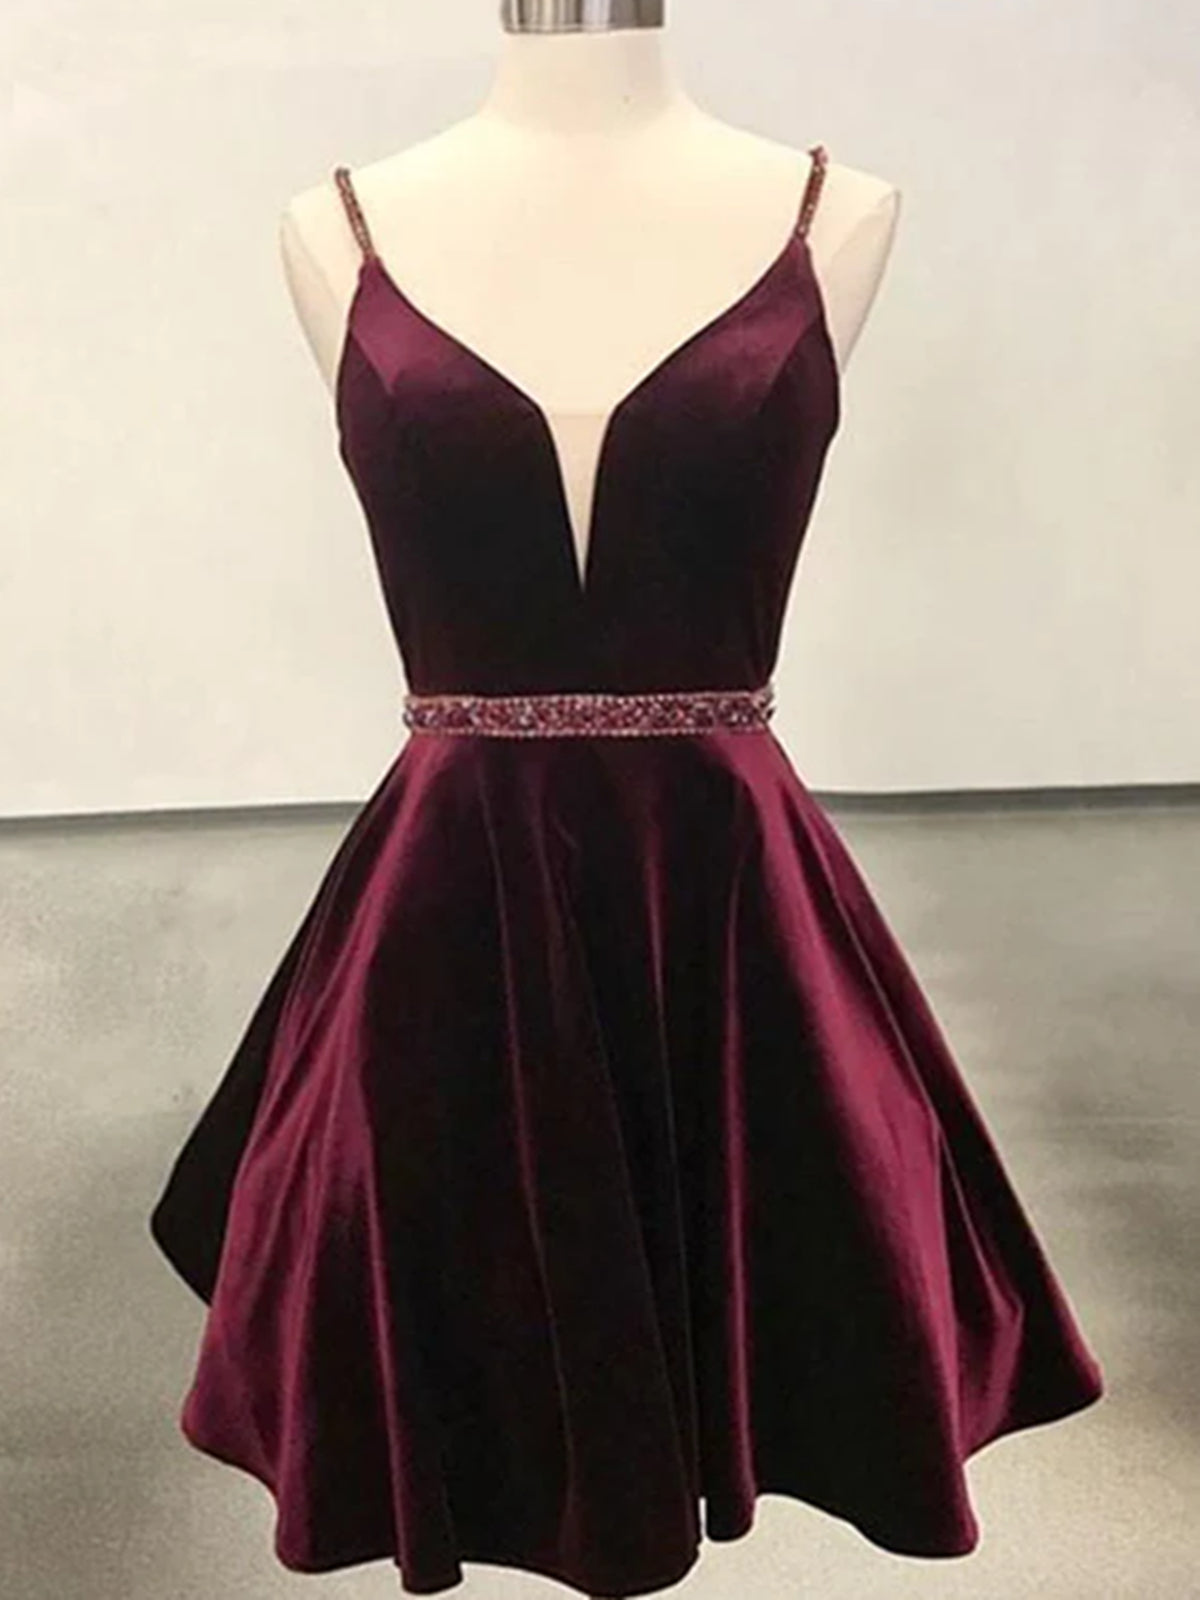 Party Dresses For Over 60S, Deep V Neck Short Burgundy Prom Dresses, Deep V Neck Short Burgundy Formal Homecoming Dresses